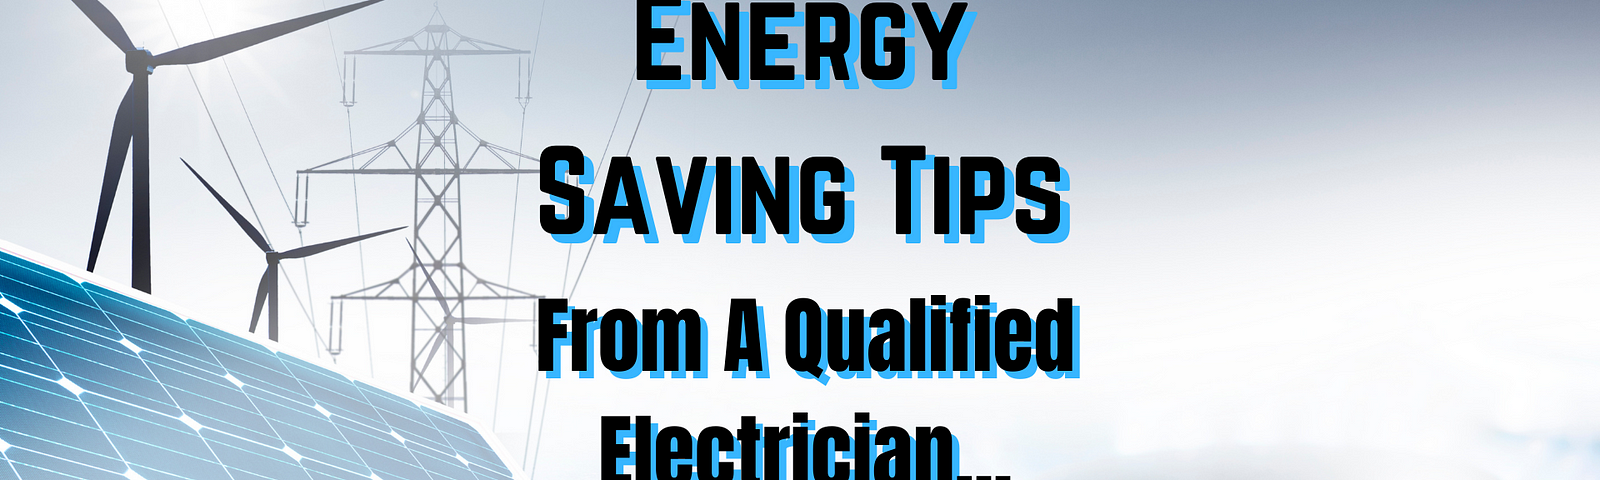 energy saving tips from a qualified electrician